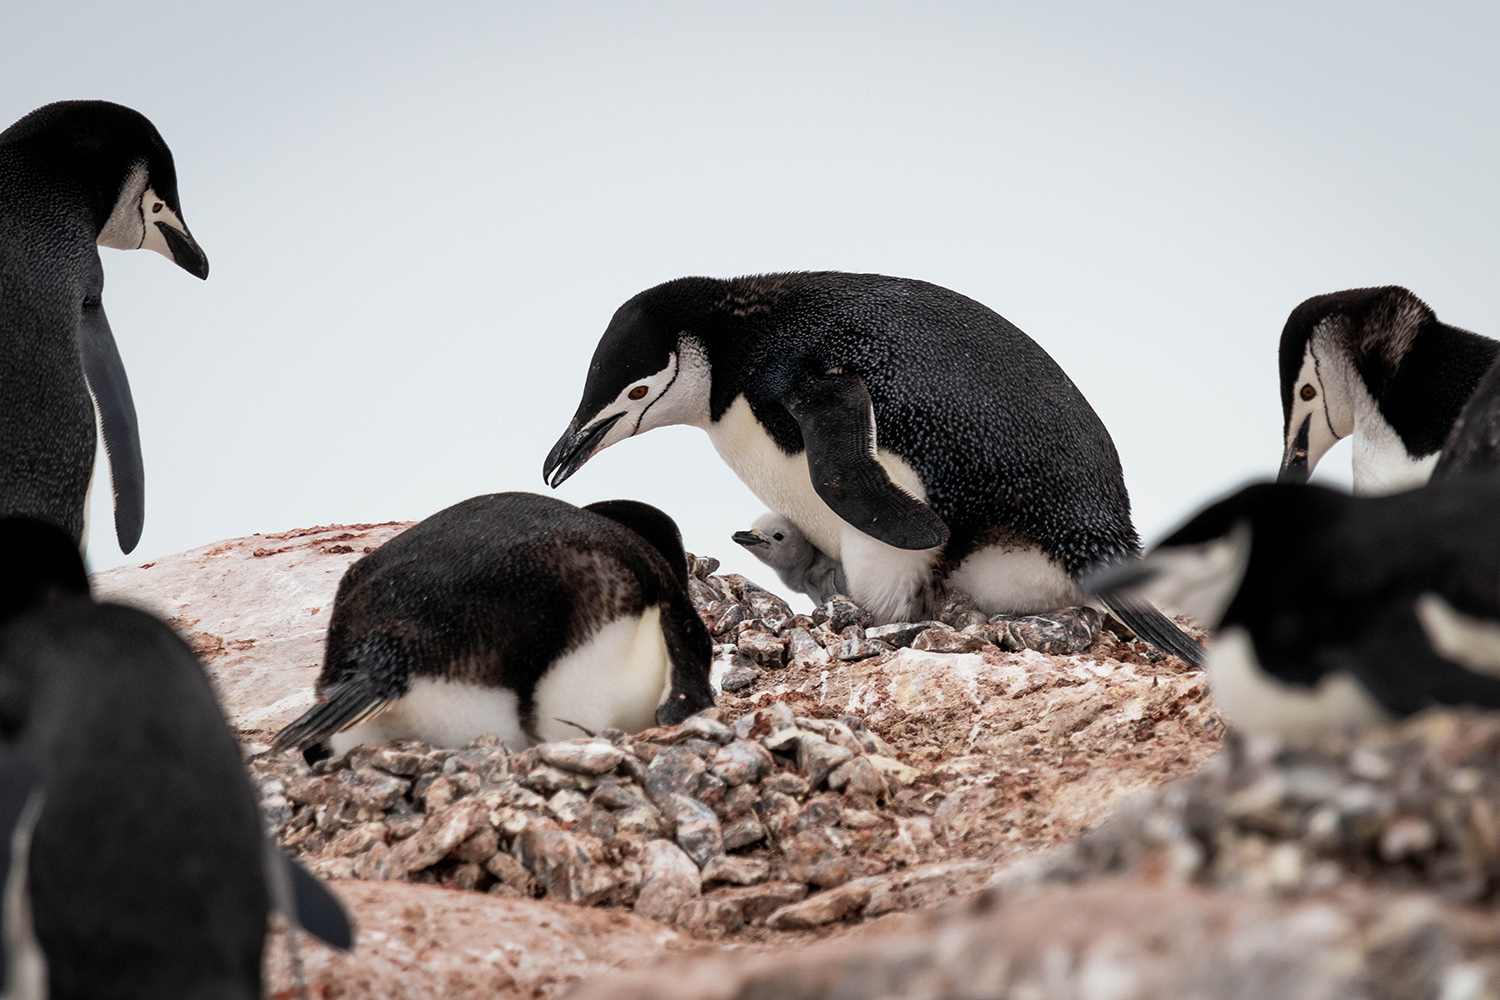 several penguins in a circle around a nest